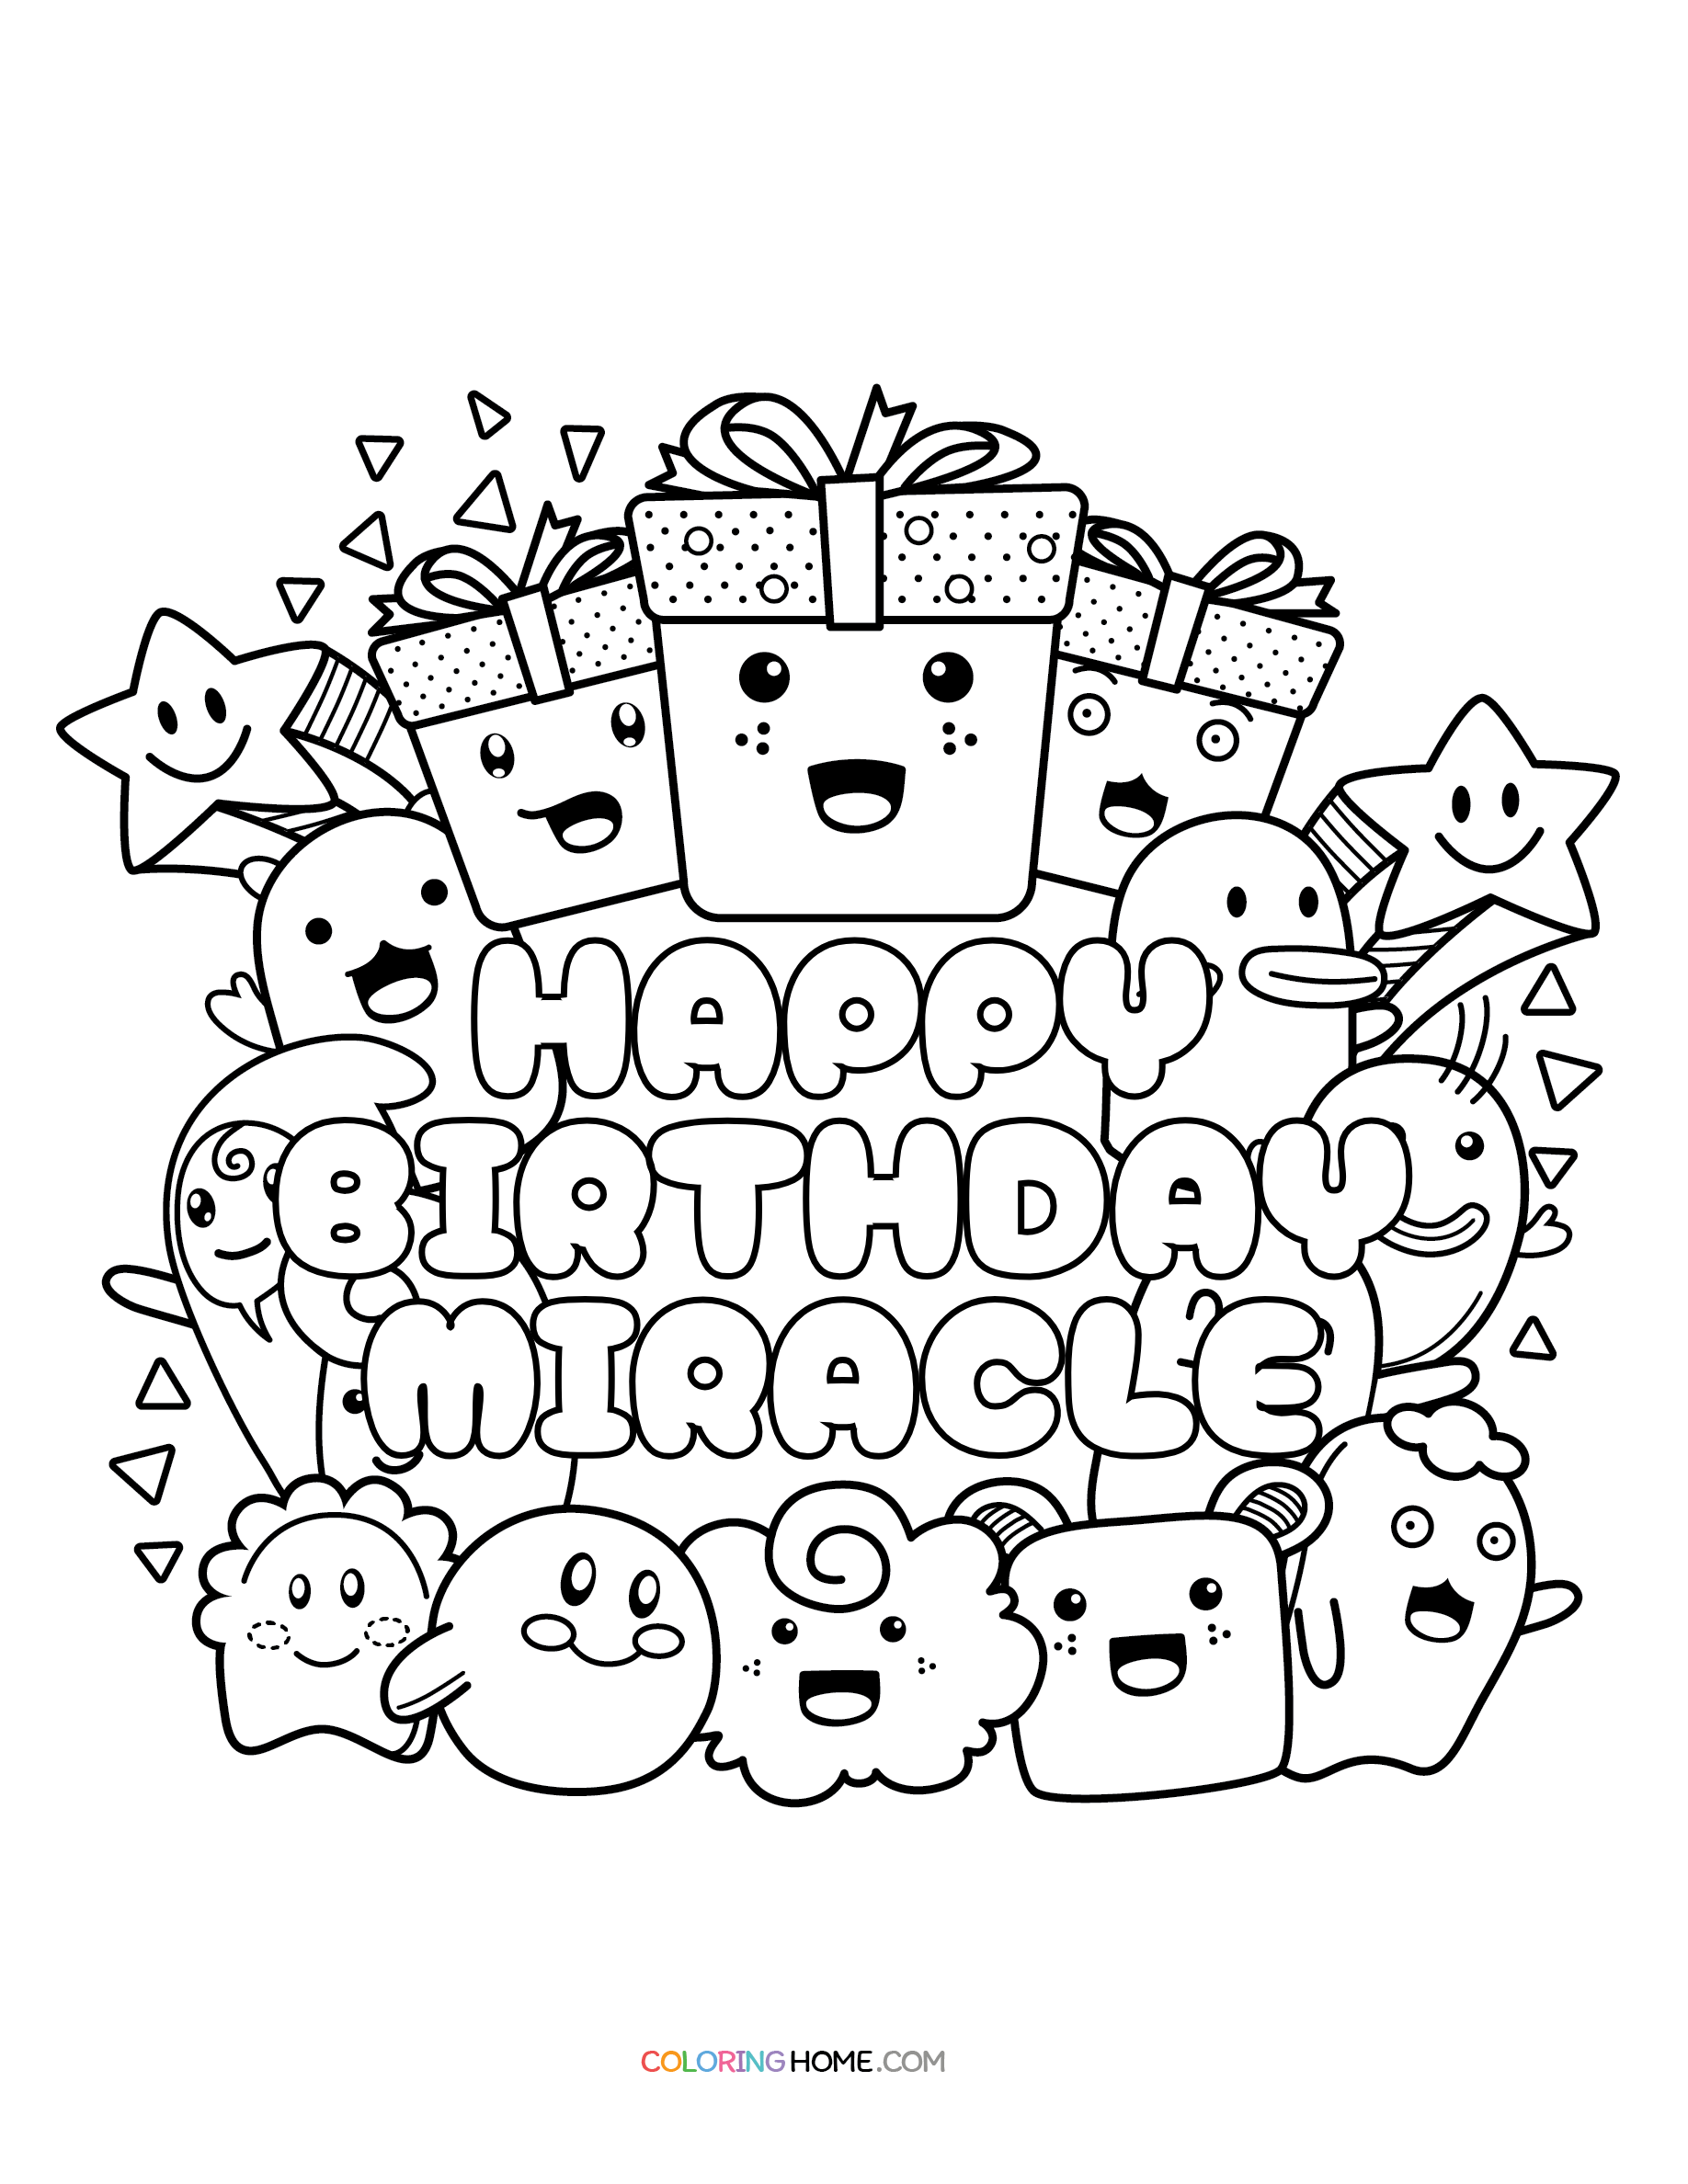 Happy Birthday Miracle coloring page